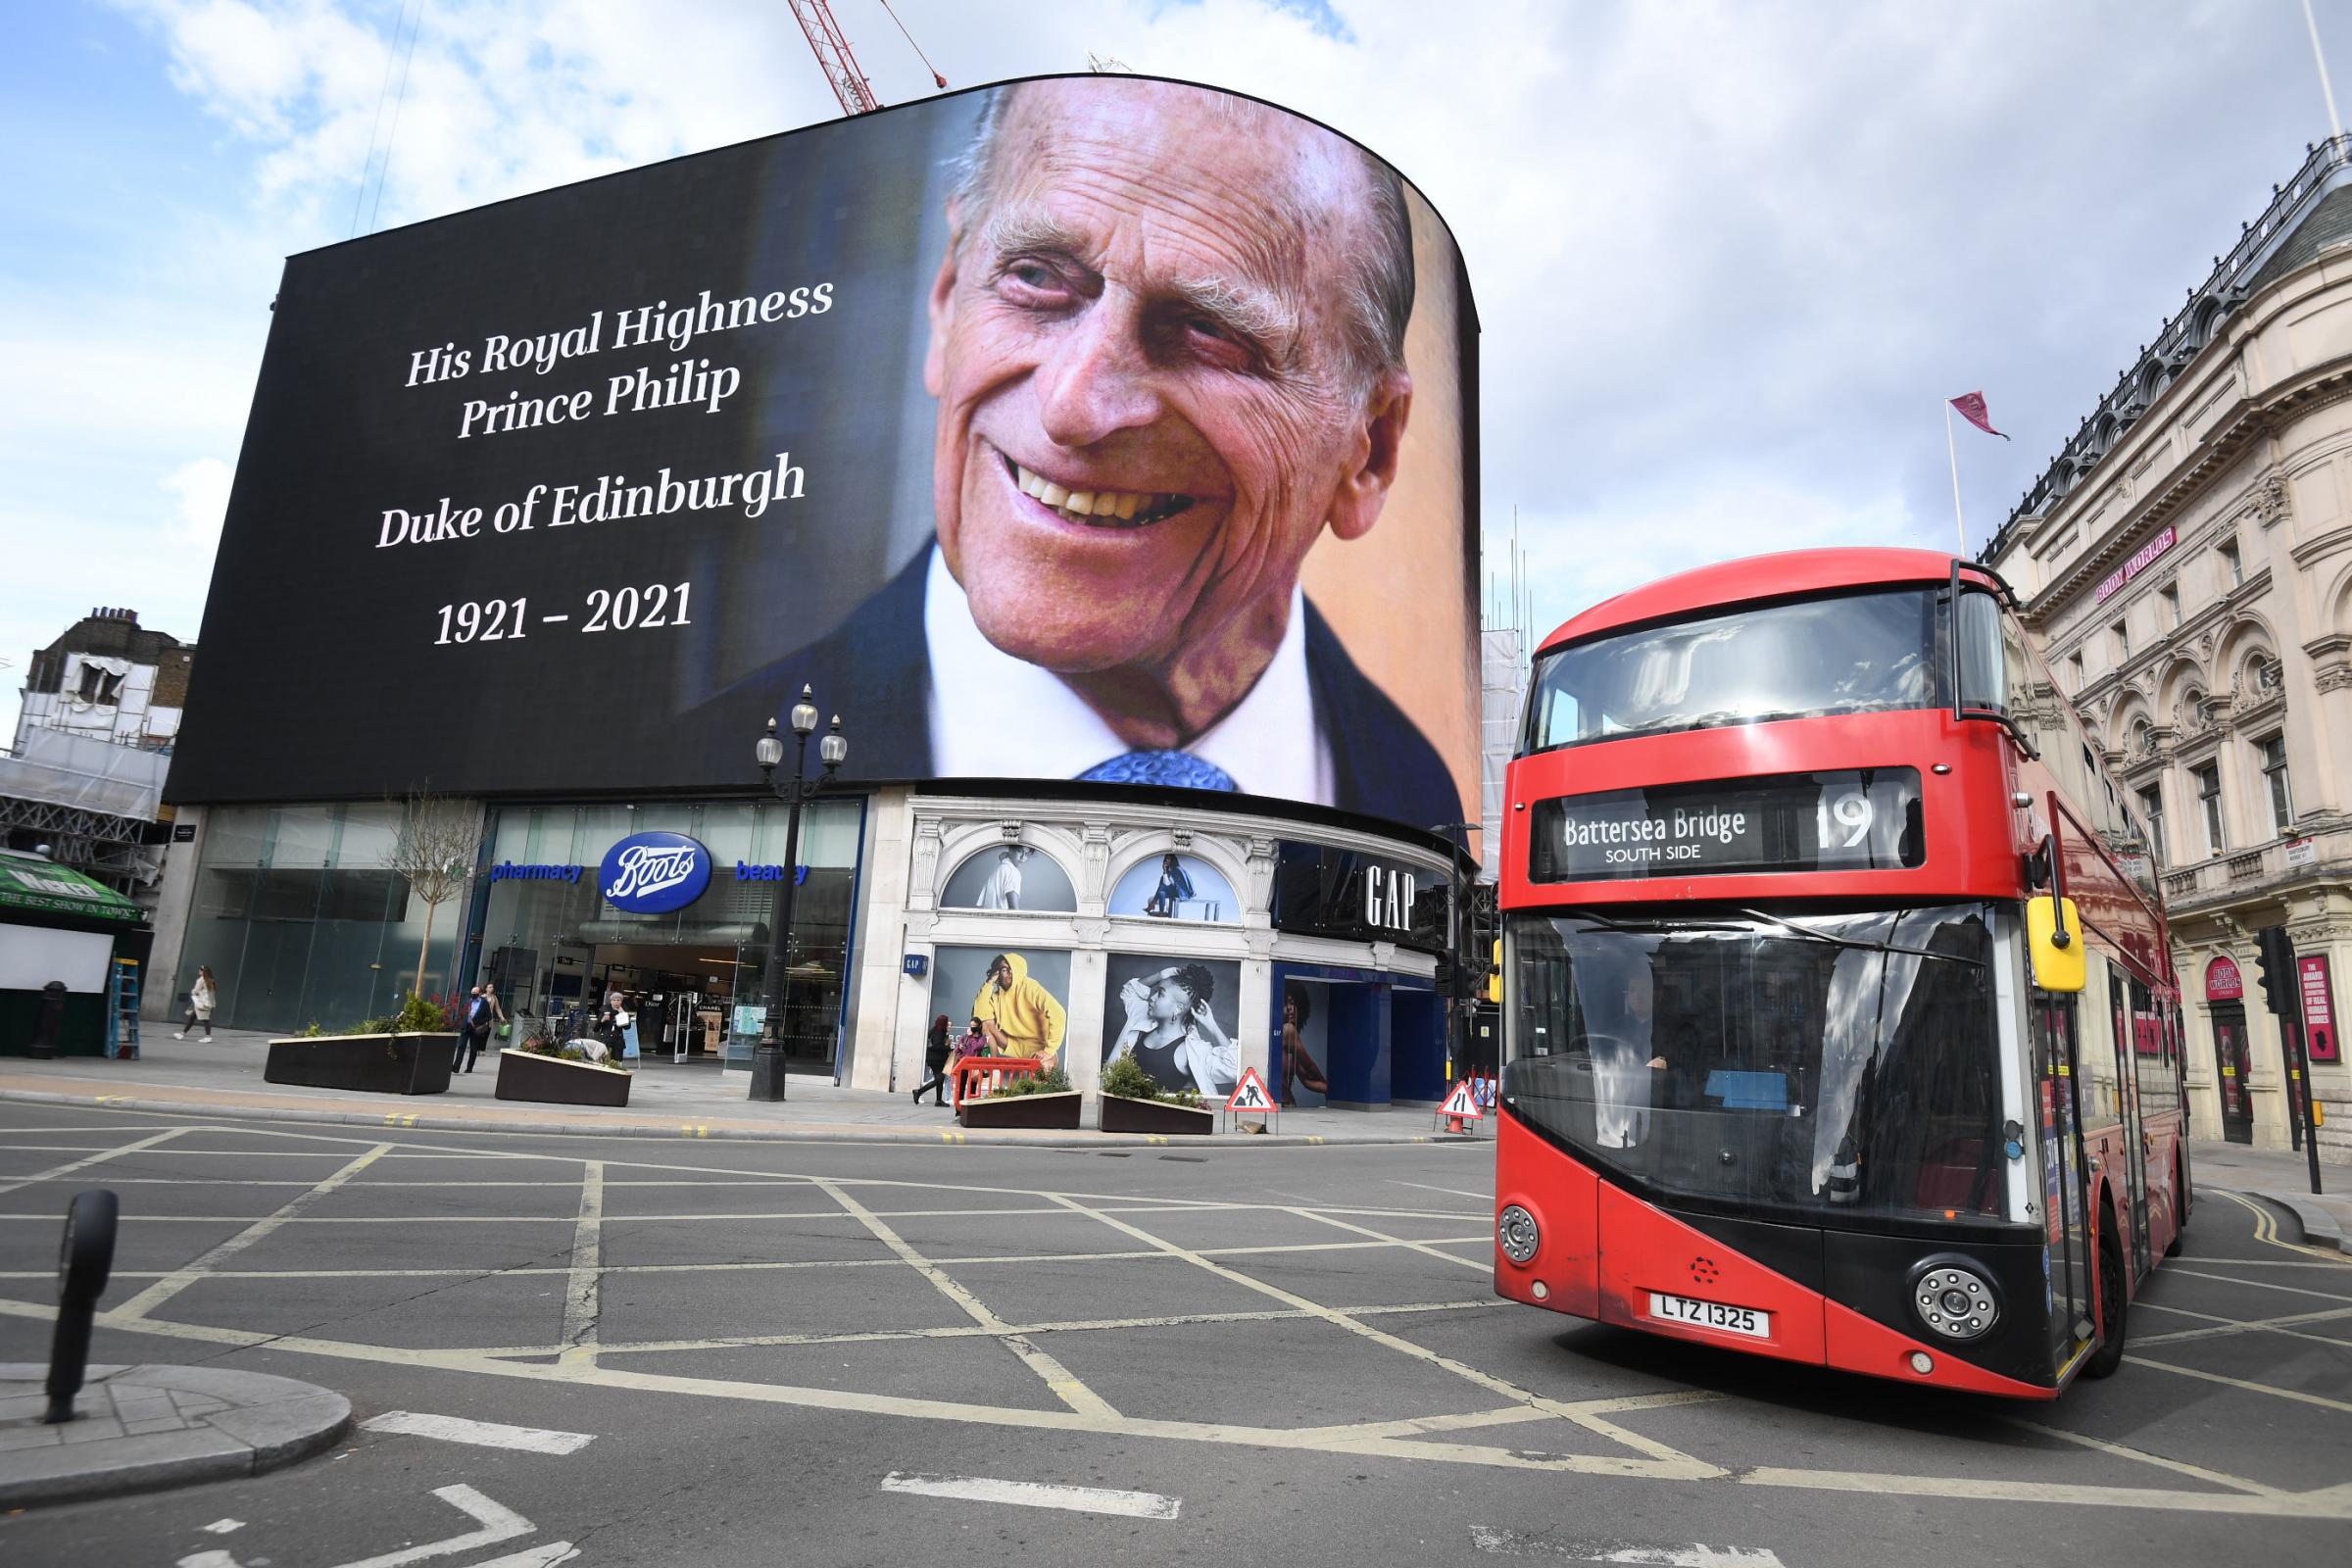 A tribute to the Duke of Edinburgh, which will be shown for 24 hours, on display at the Piccadilly Lights in central London.